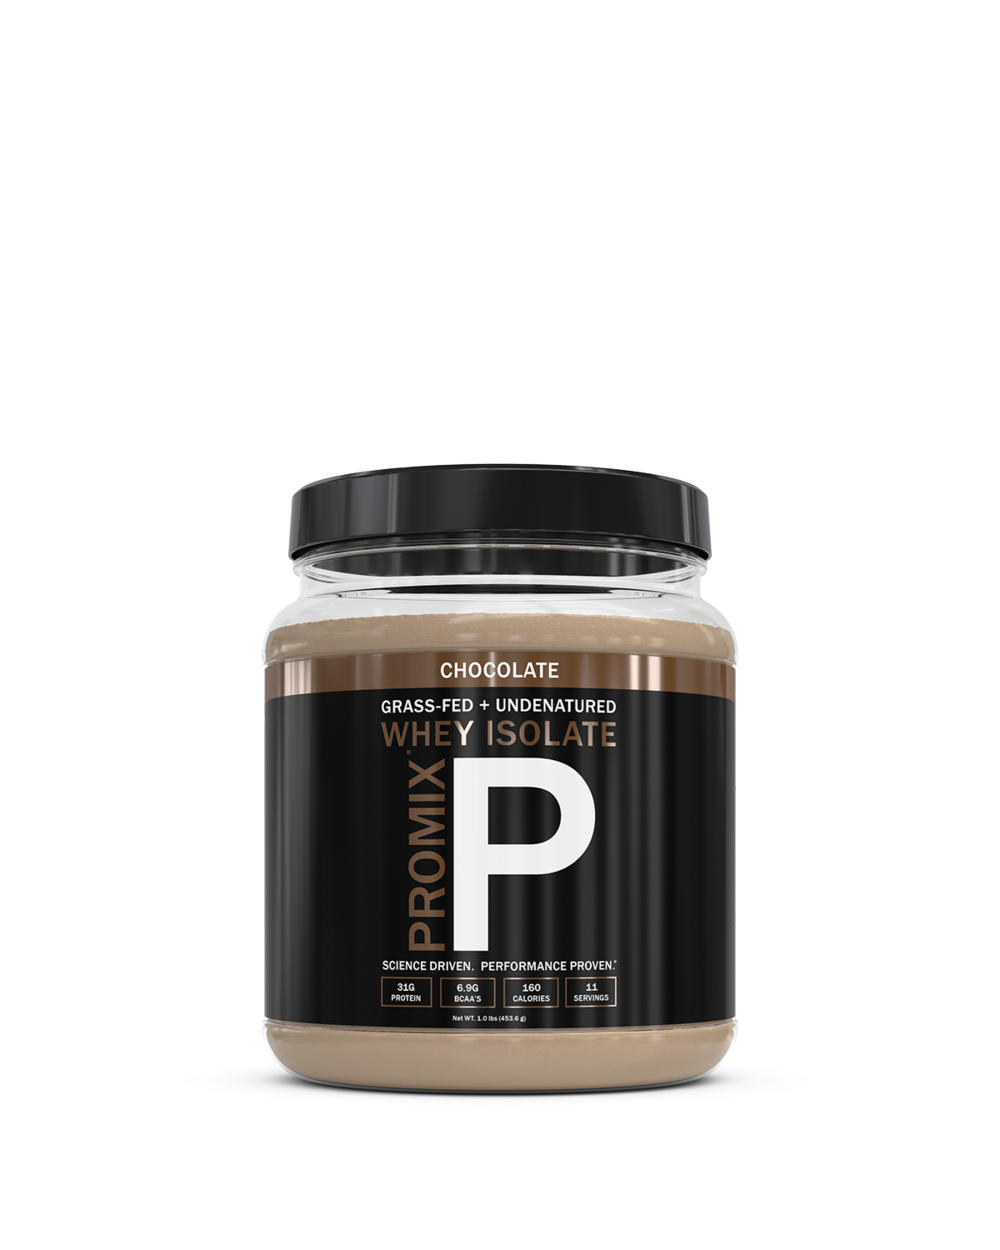 Chocolate Whey Protein Isolate Powder, Size: 1 LB